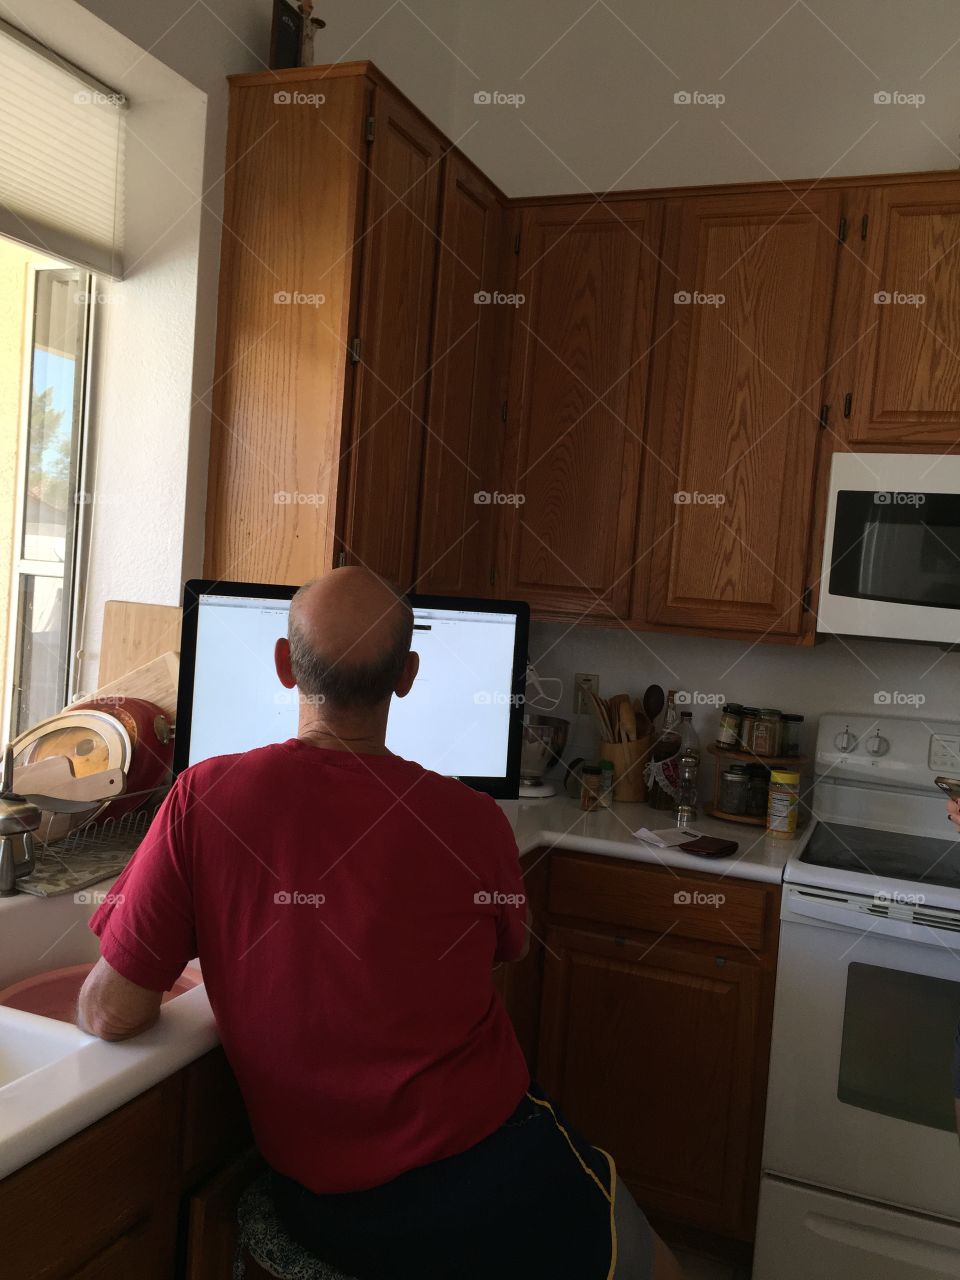 Using computer in the kitchen 